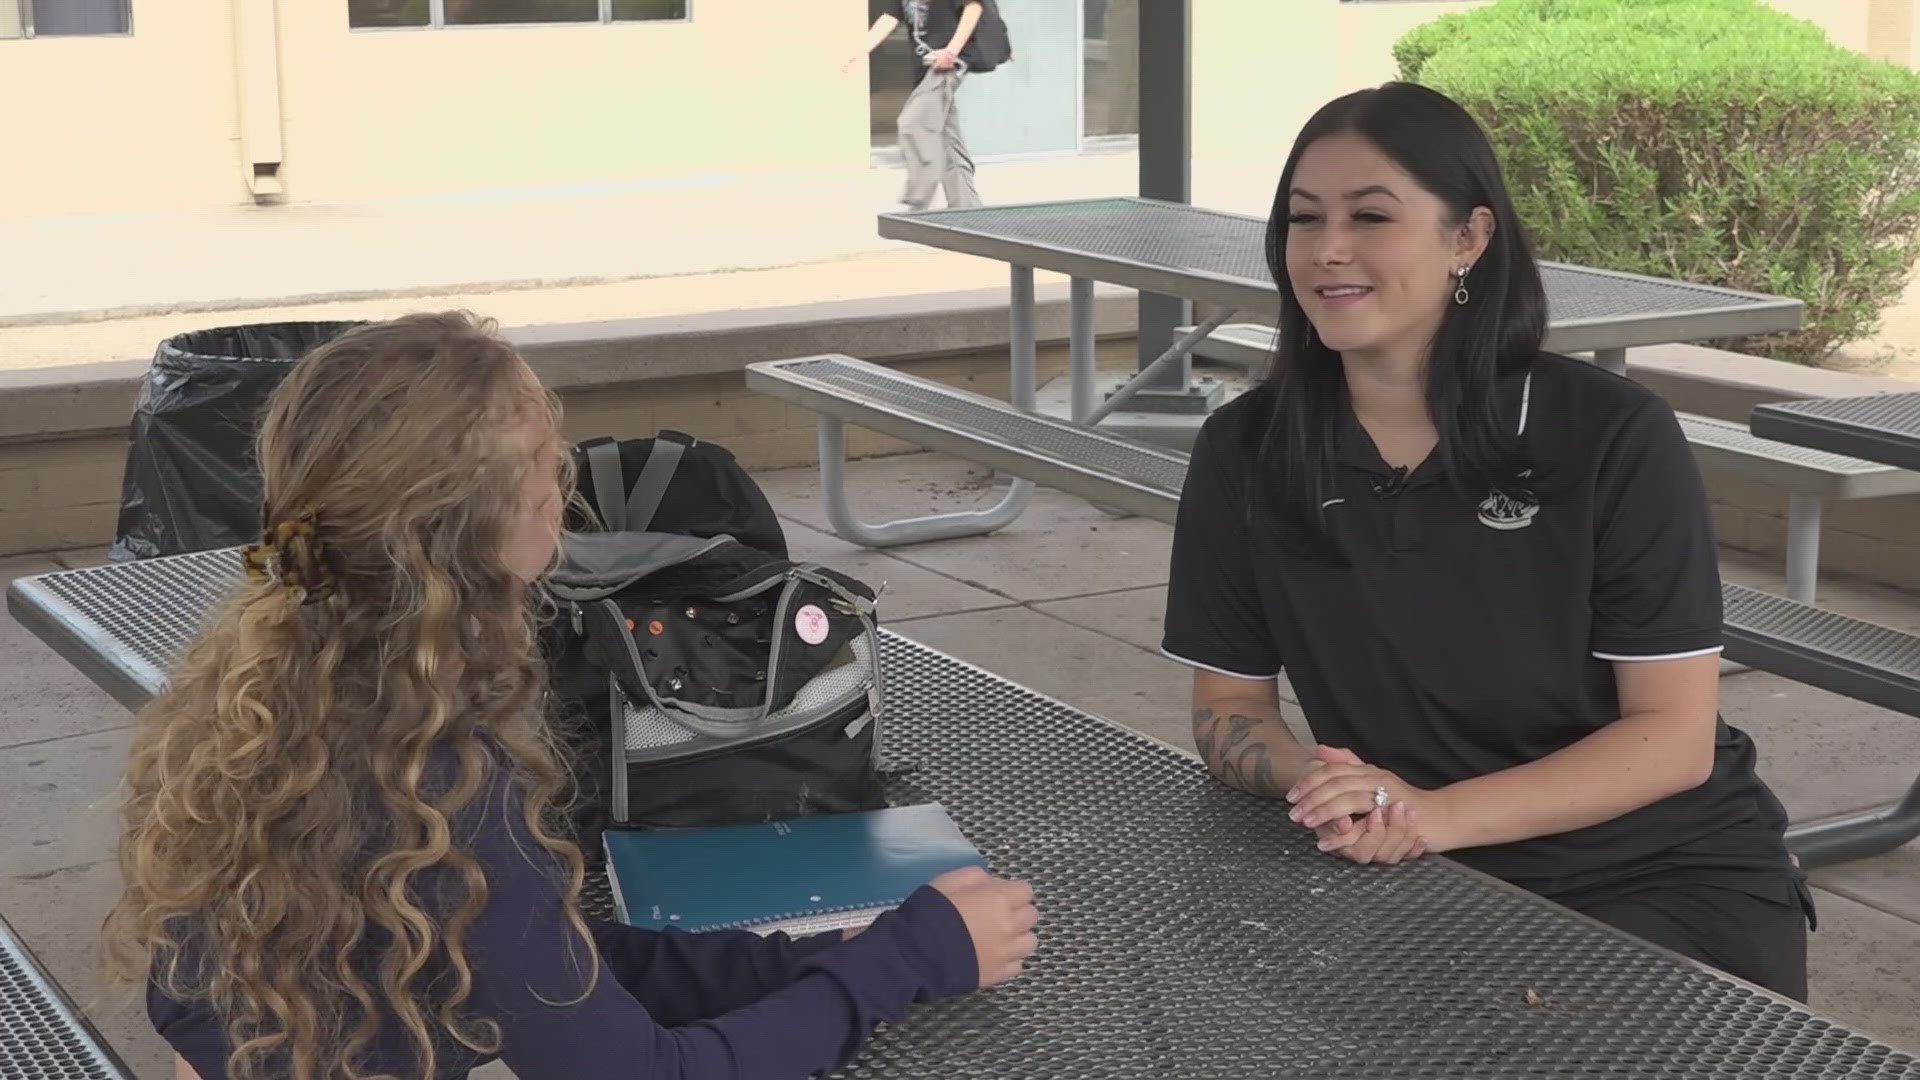 See how Student Support specialists at the Agua Fria Unified School District are helping kids find success at school.